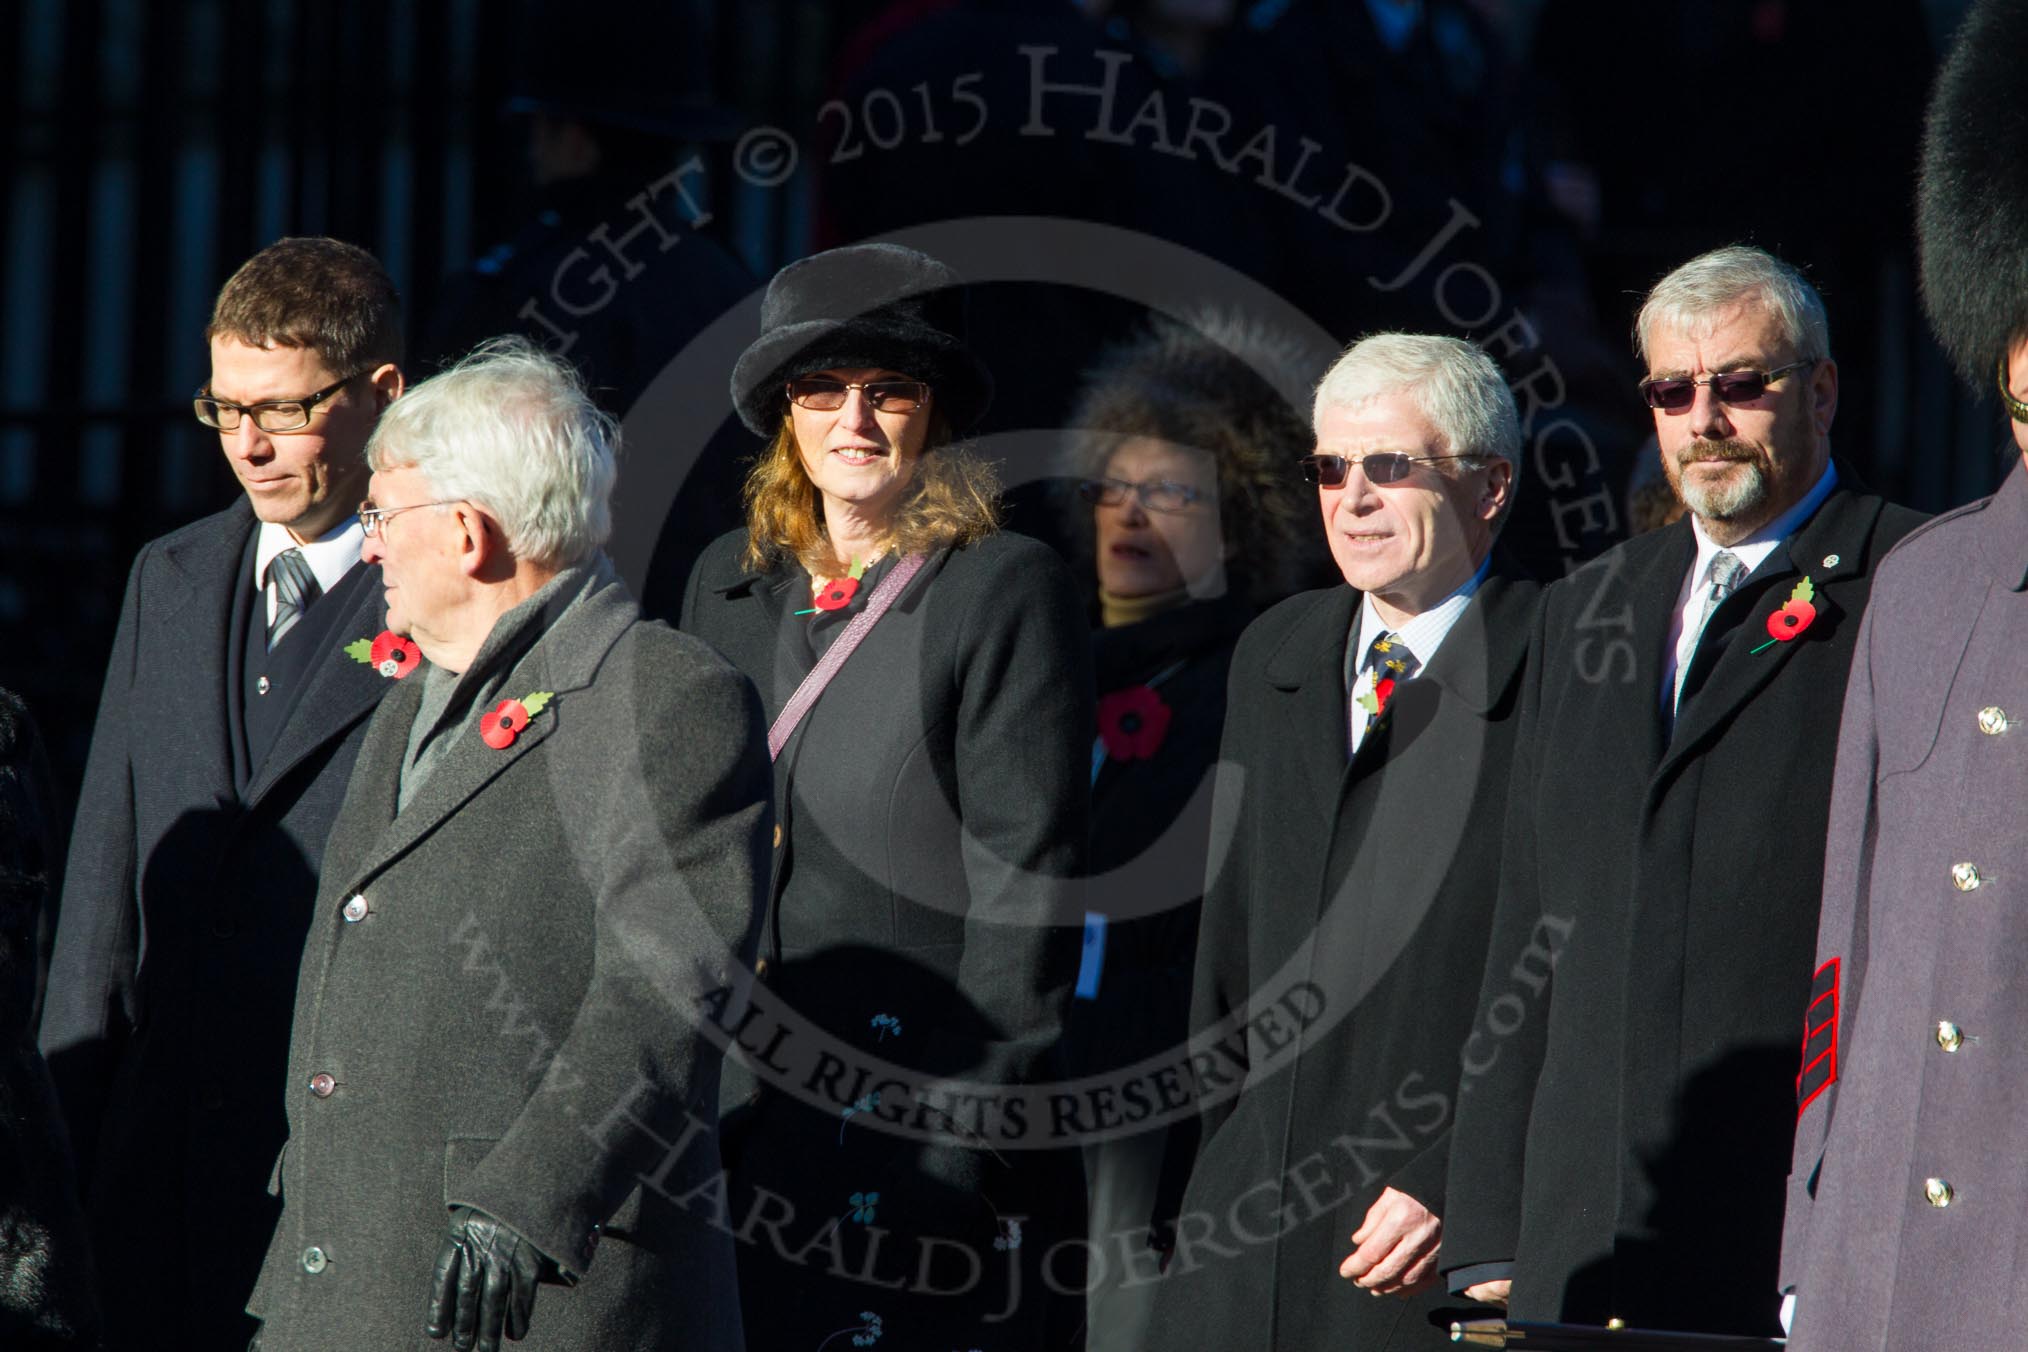 Remembrance Sunday Cenotaph March Past 2013: M42 - 41 Club..
Press stand opposite the Foreign Office building, Whitehall, London SW1,
London,
Greater London,
United Kingdom,
on 10 November 2013 at 12:14, image #2200